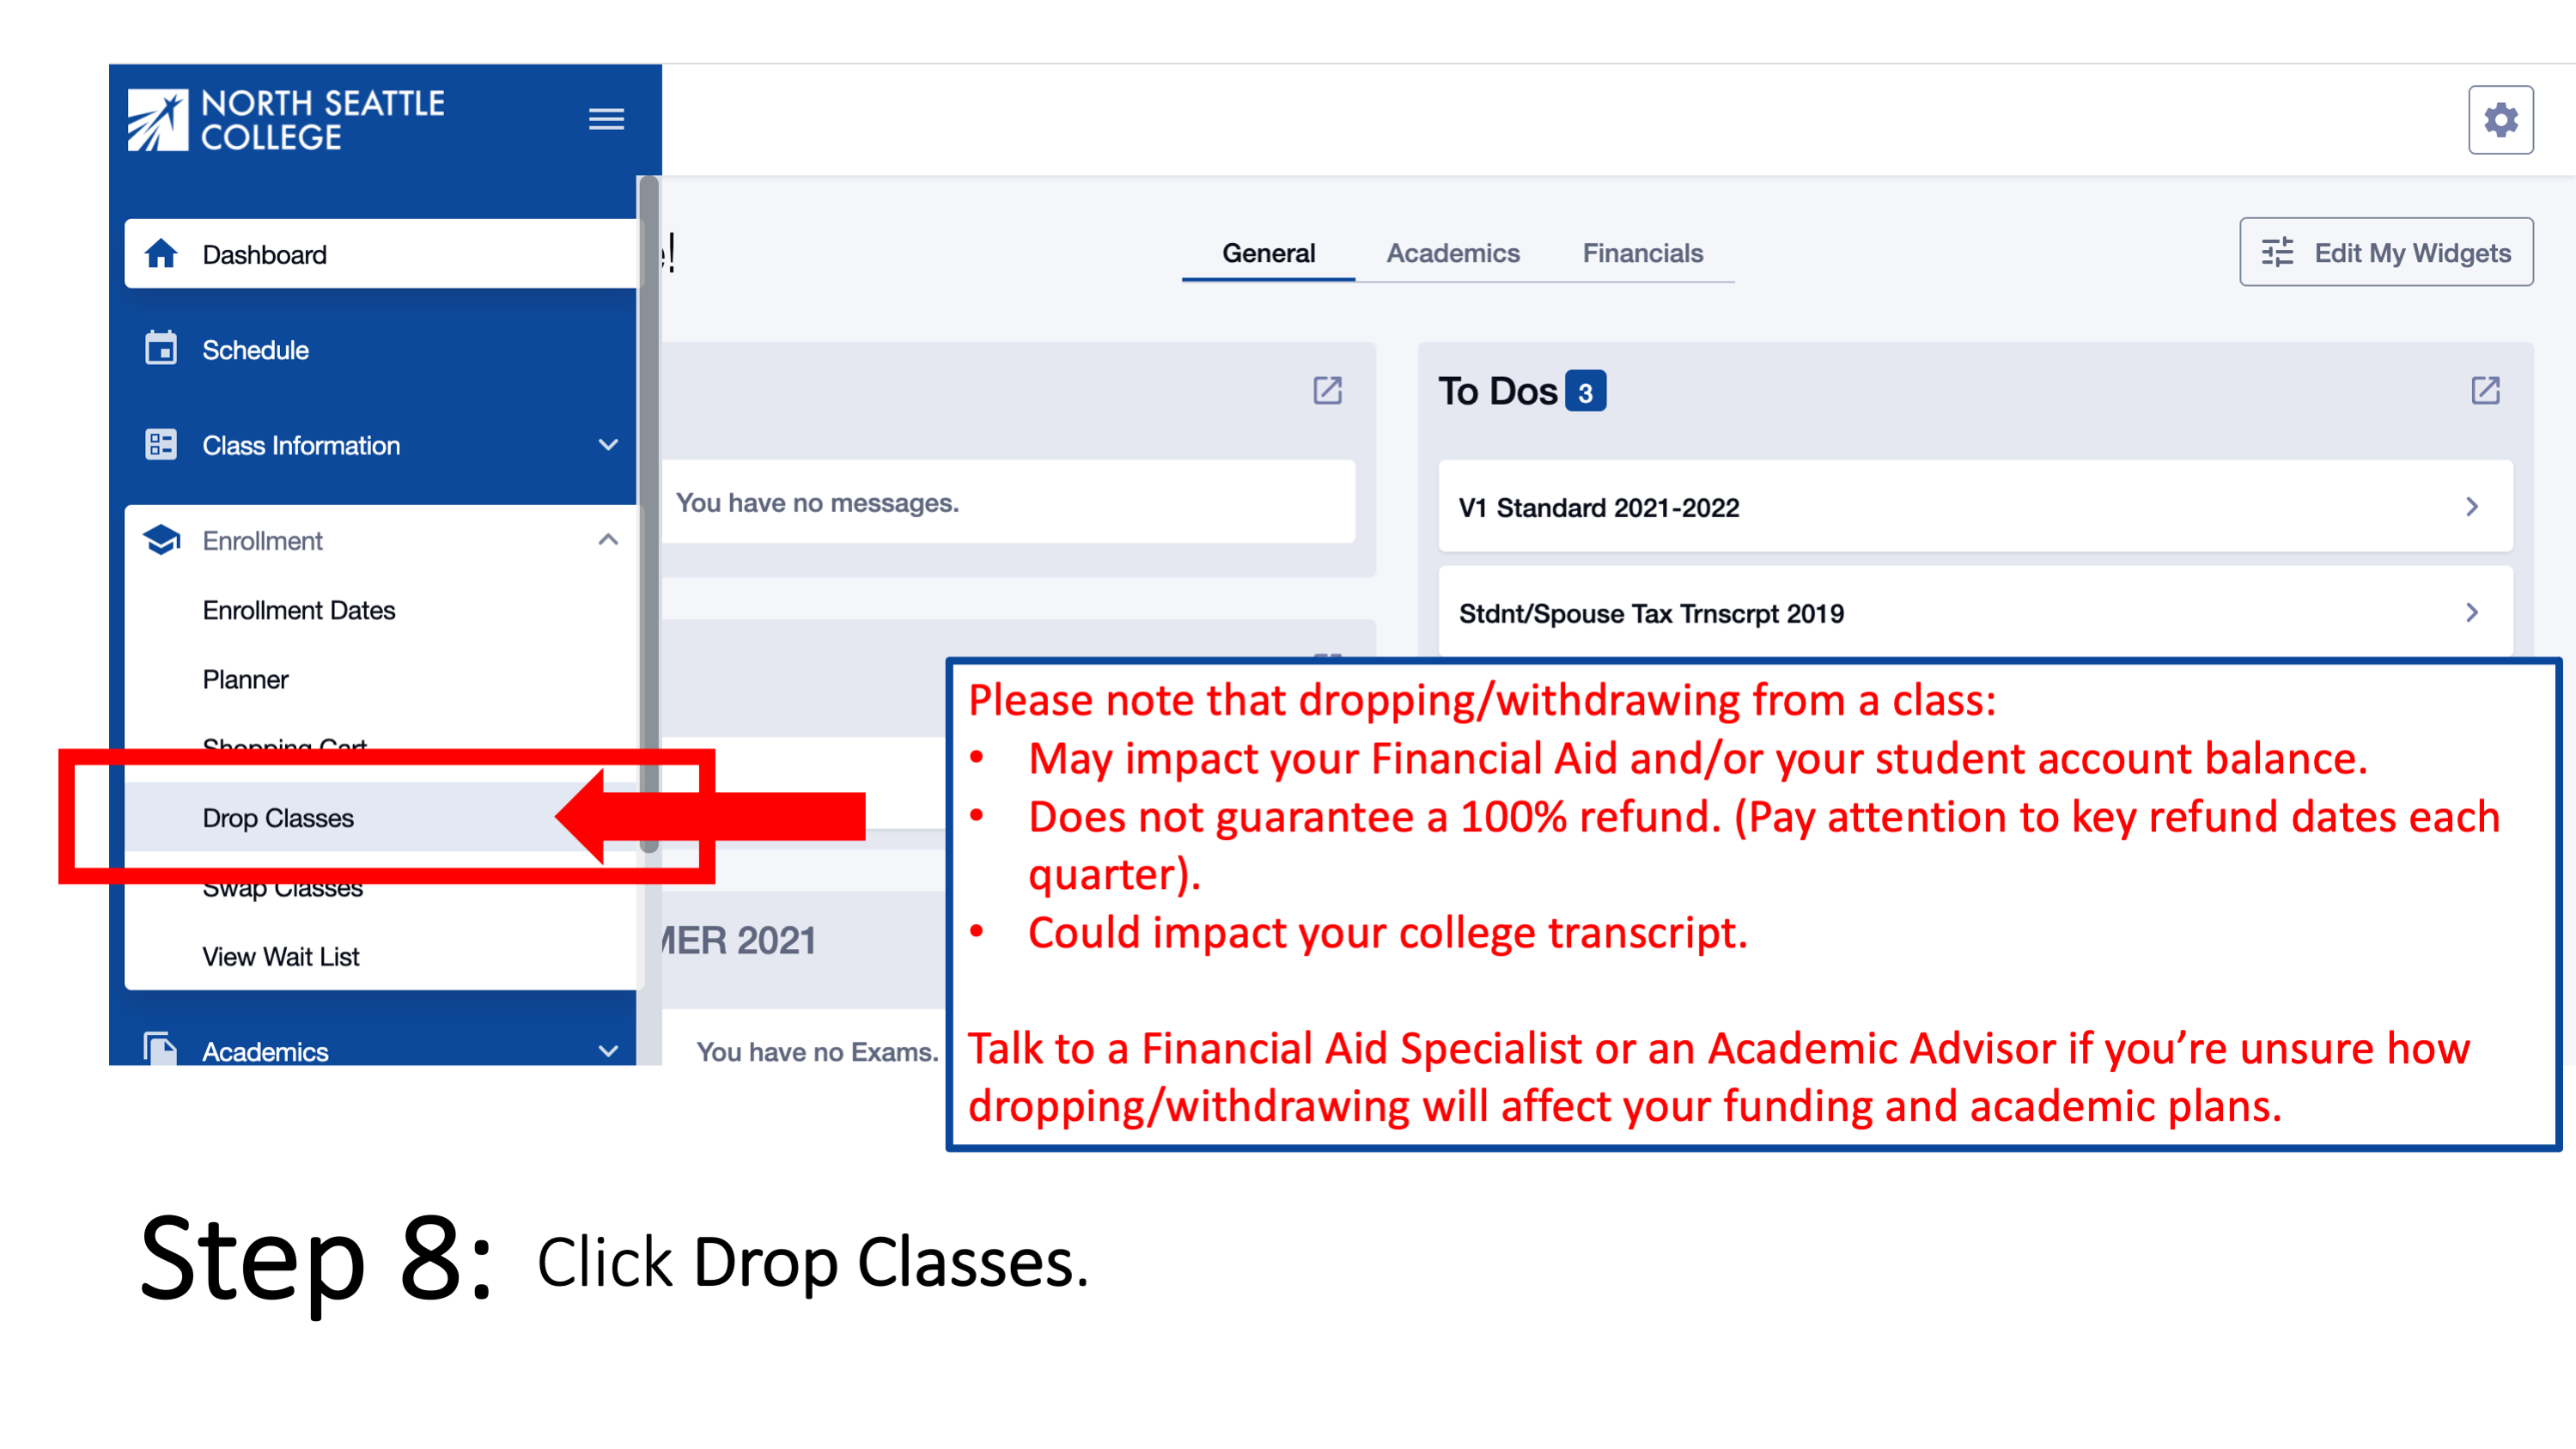 Step 8: Click Drop Classes. Please note that dropping/withdrawing from a class: may impact your Financial Aid and/or your student account balance; does not guarantee a 100% refund (Pay attention to key refund dates each quarter); could impact your official college transcript. Talk to a Financial Aid Specialist or an Academic Advisor if you’re unsure how dropping/withdrawing will affect your funding and academic plans.